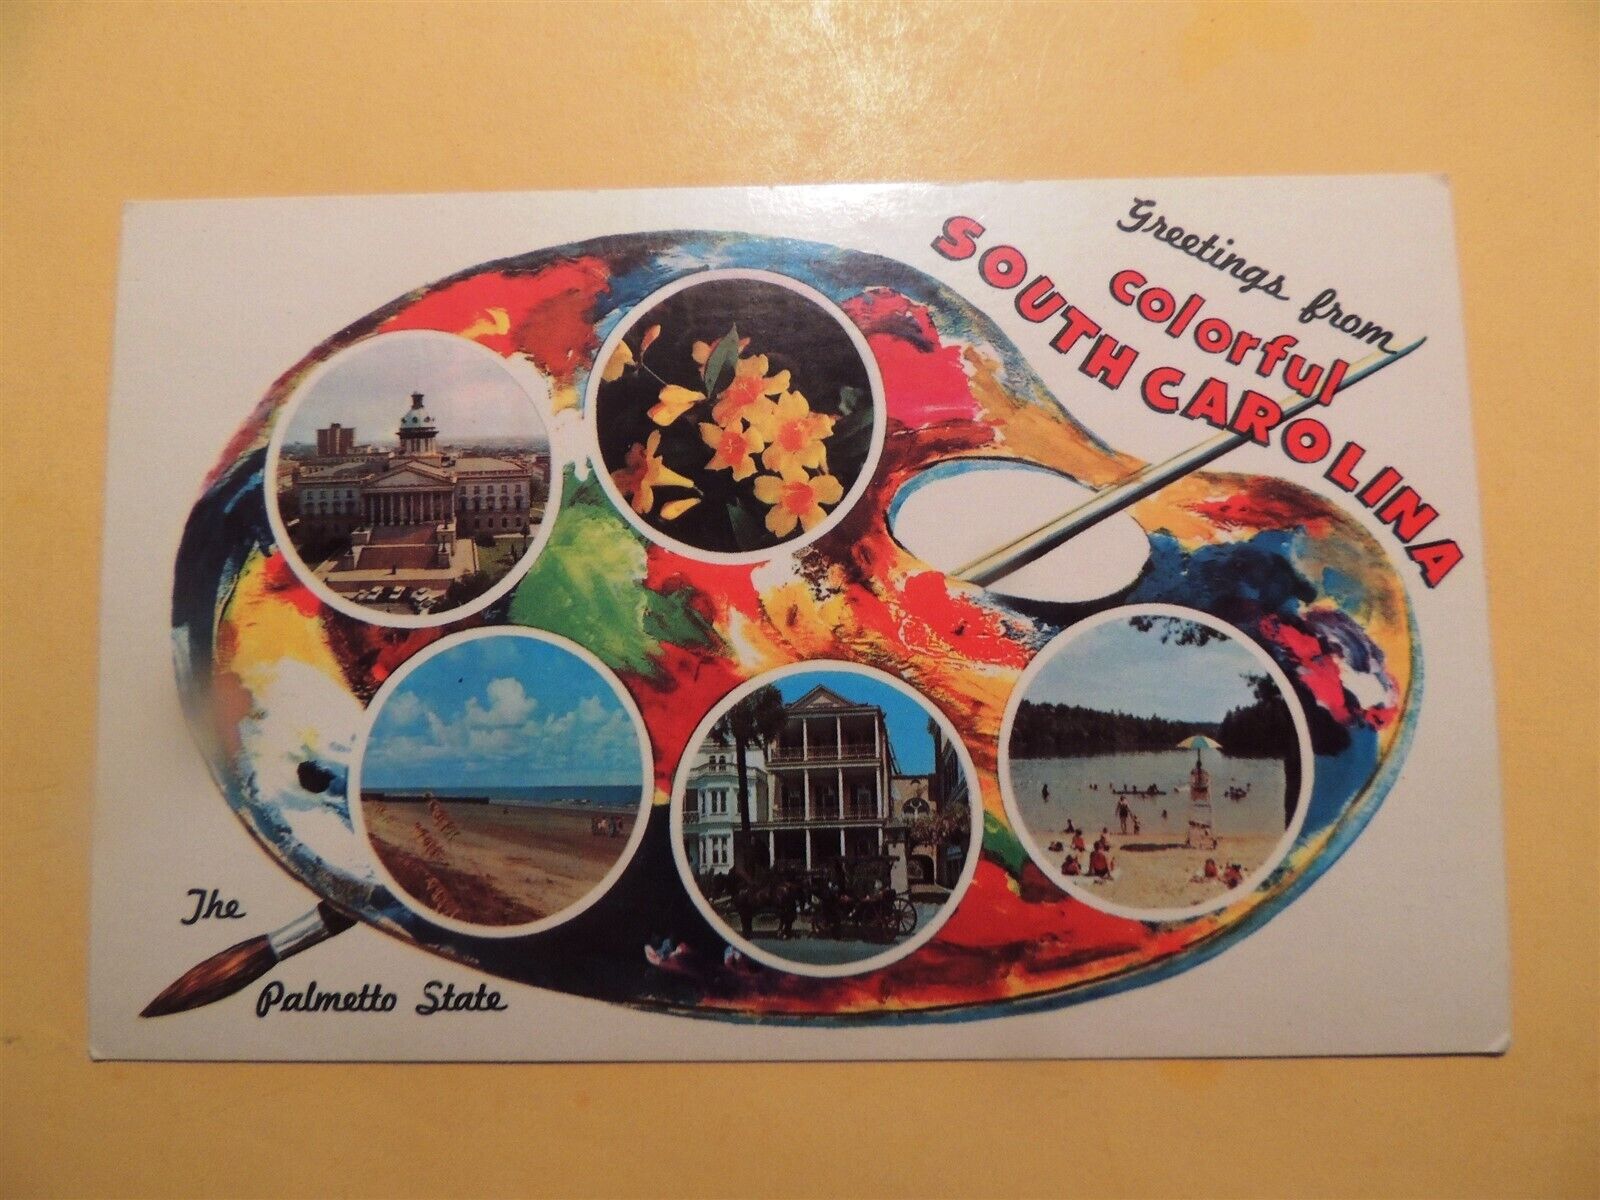 Greetings from Colorful South Carolina vintage postcard artist palette views